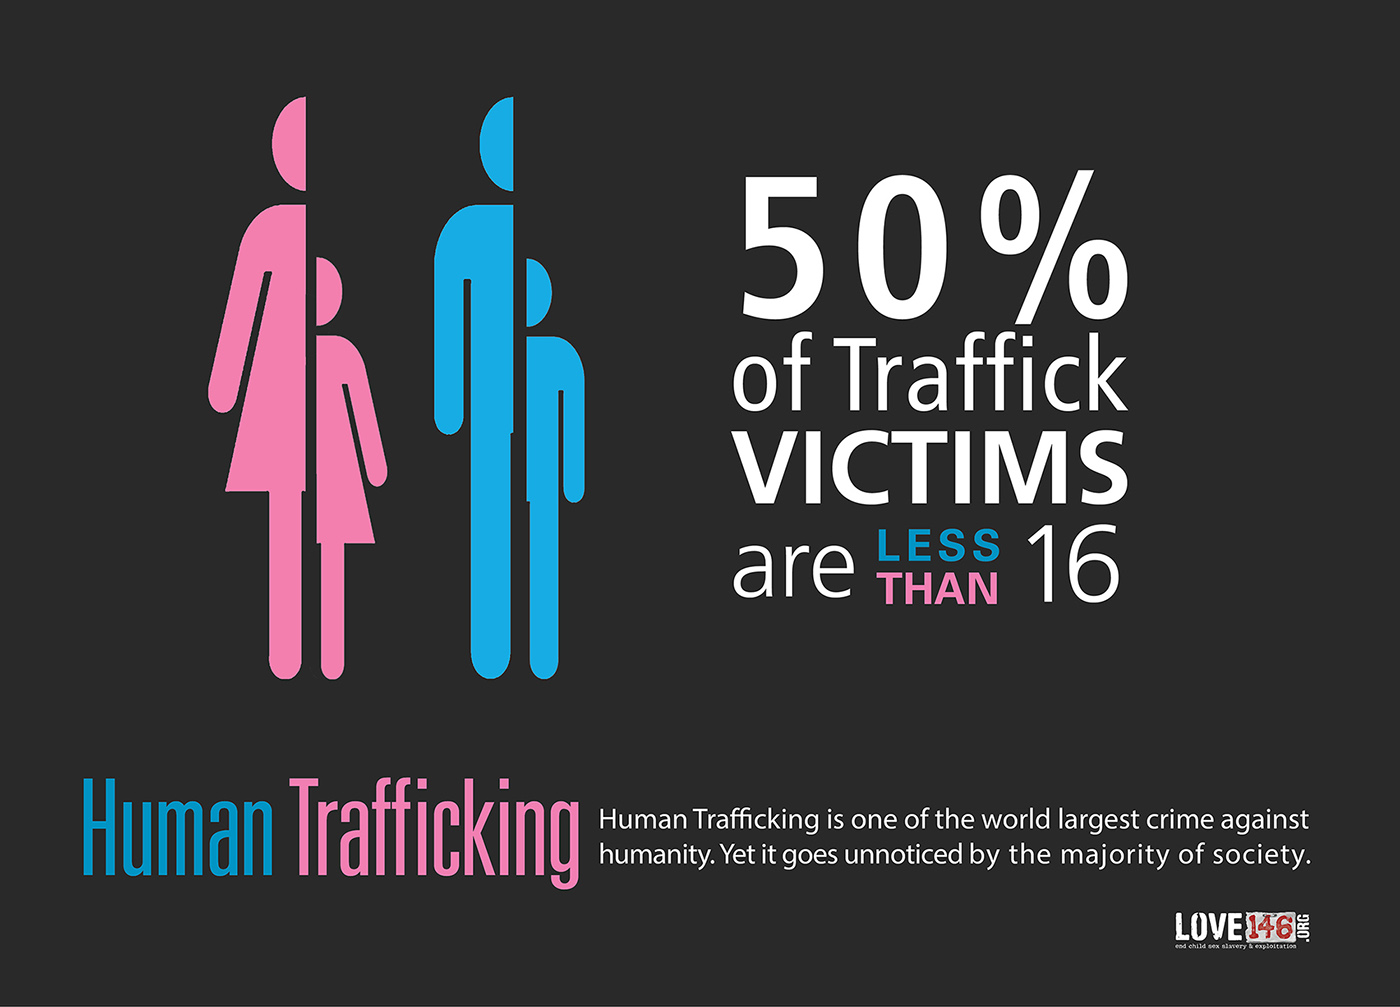 Adobe Portfolio human trafficking love 146 Public Awareness Campaign posters advertisment information design statistic designers against slavery social cause